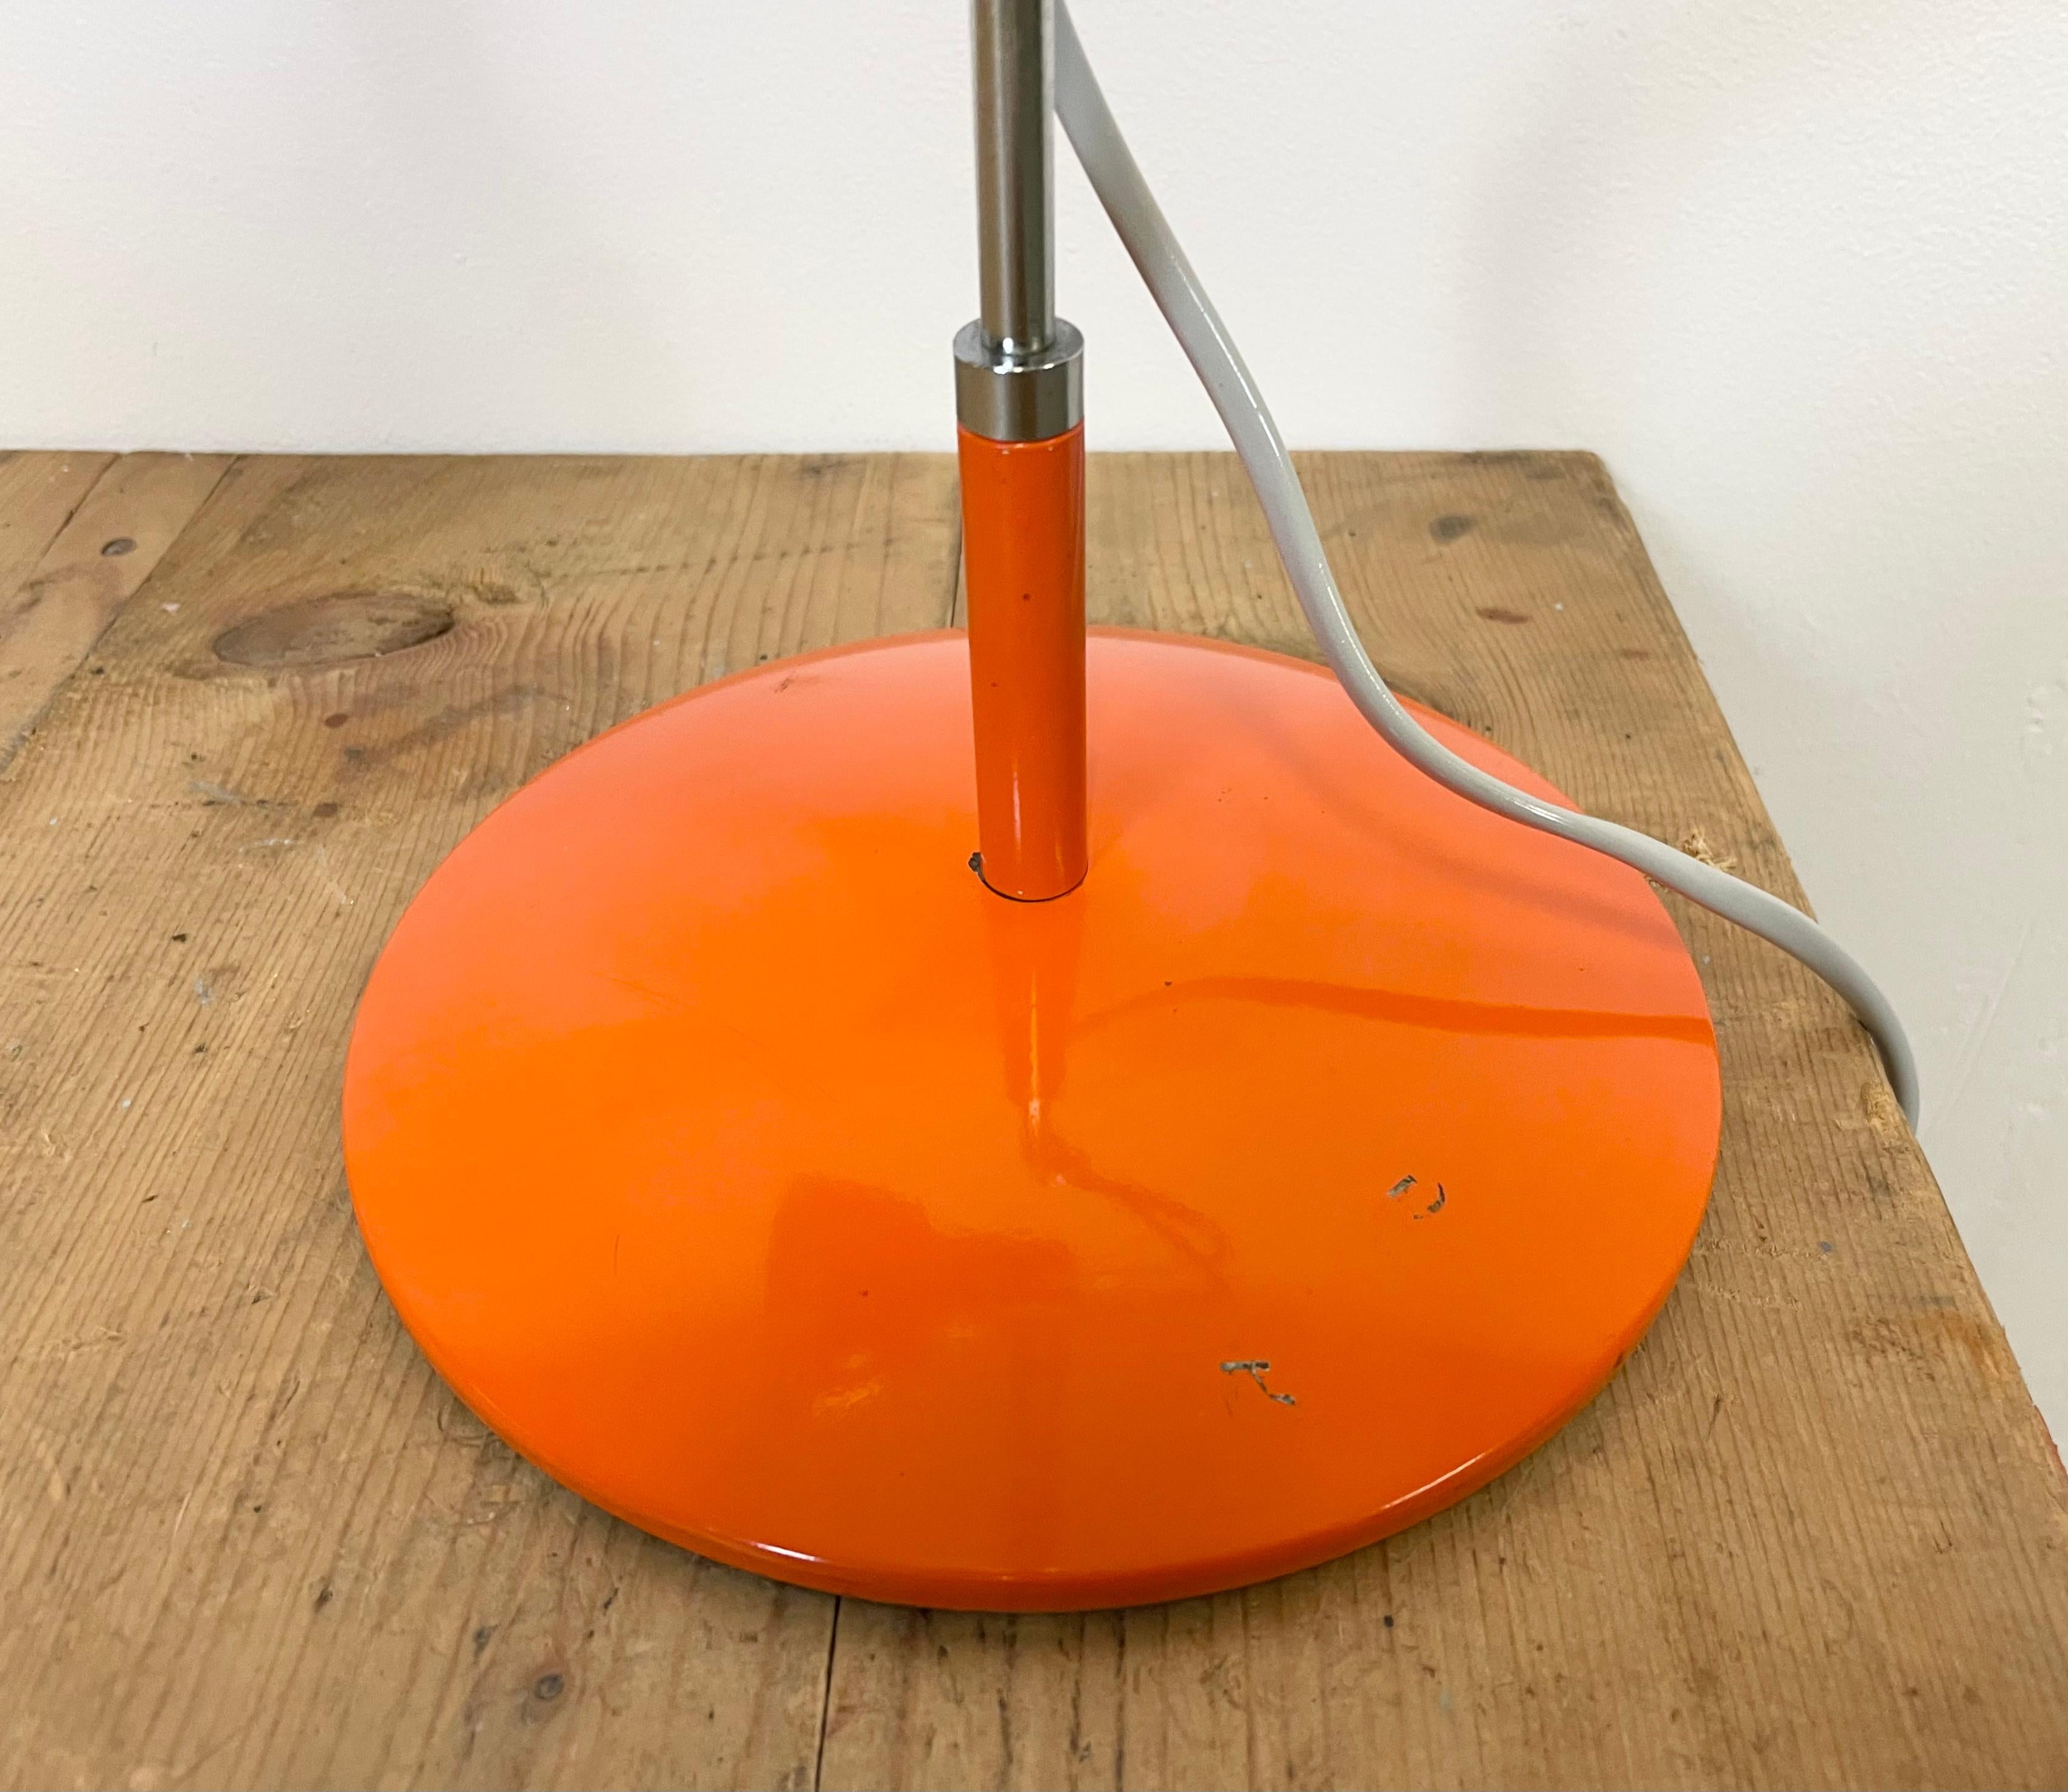 Czech Orange Table Lamp by Josef Hurka for Napako, 1960s For Sale